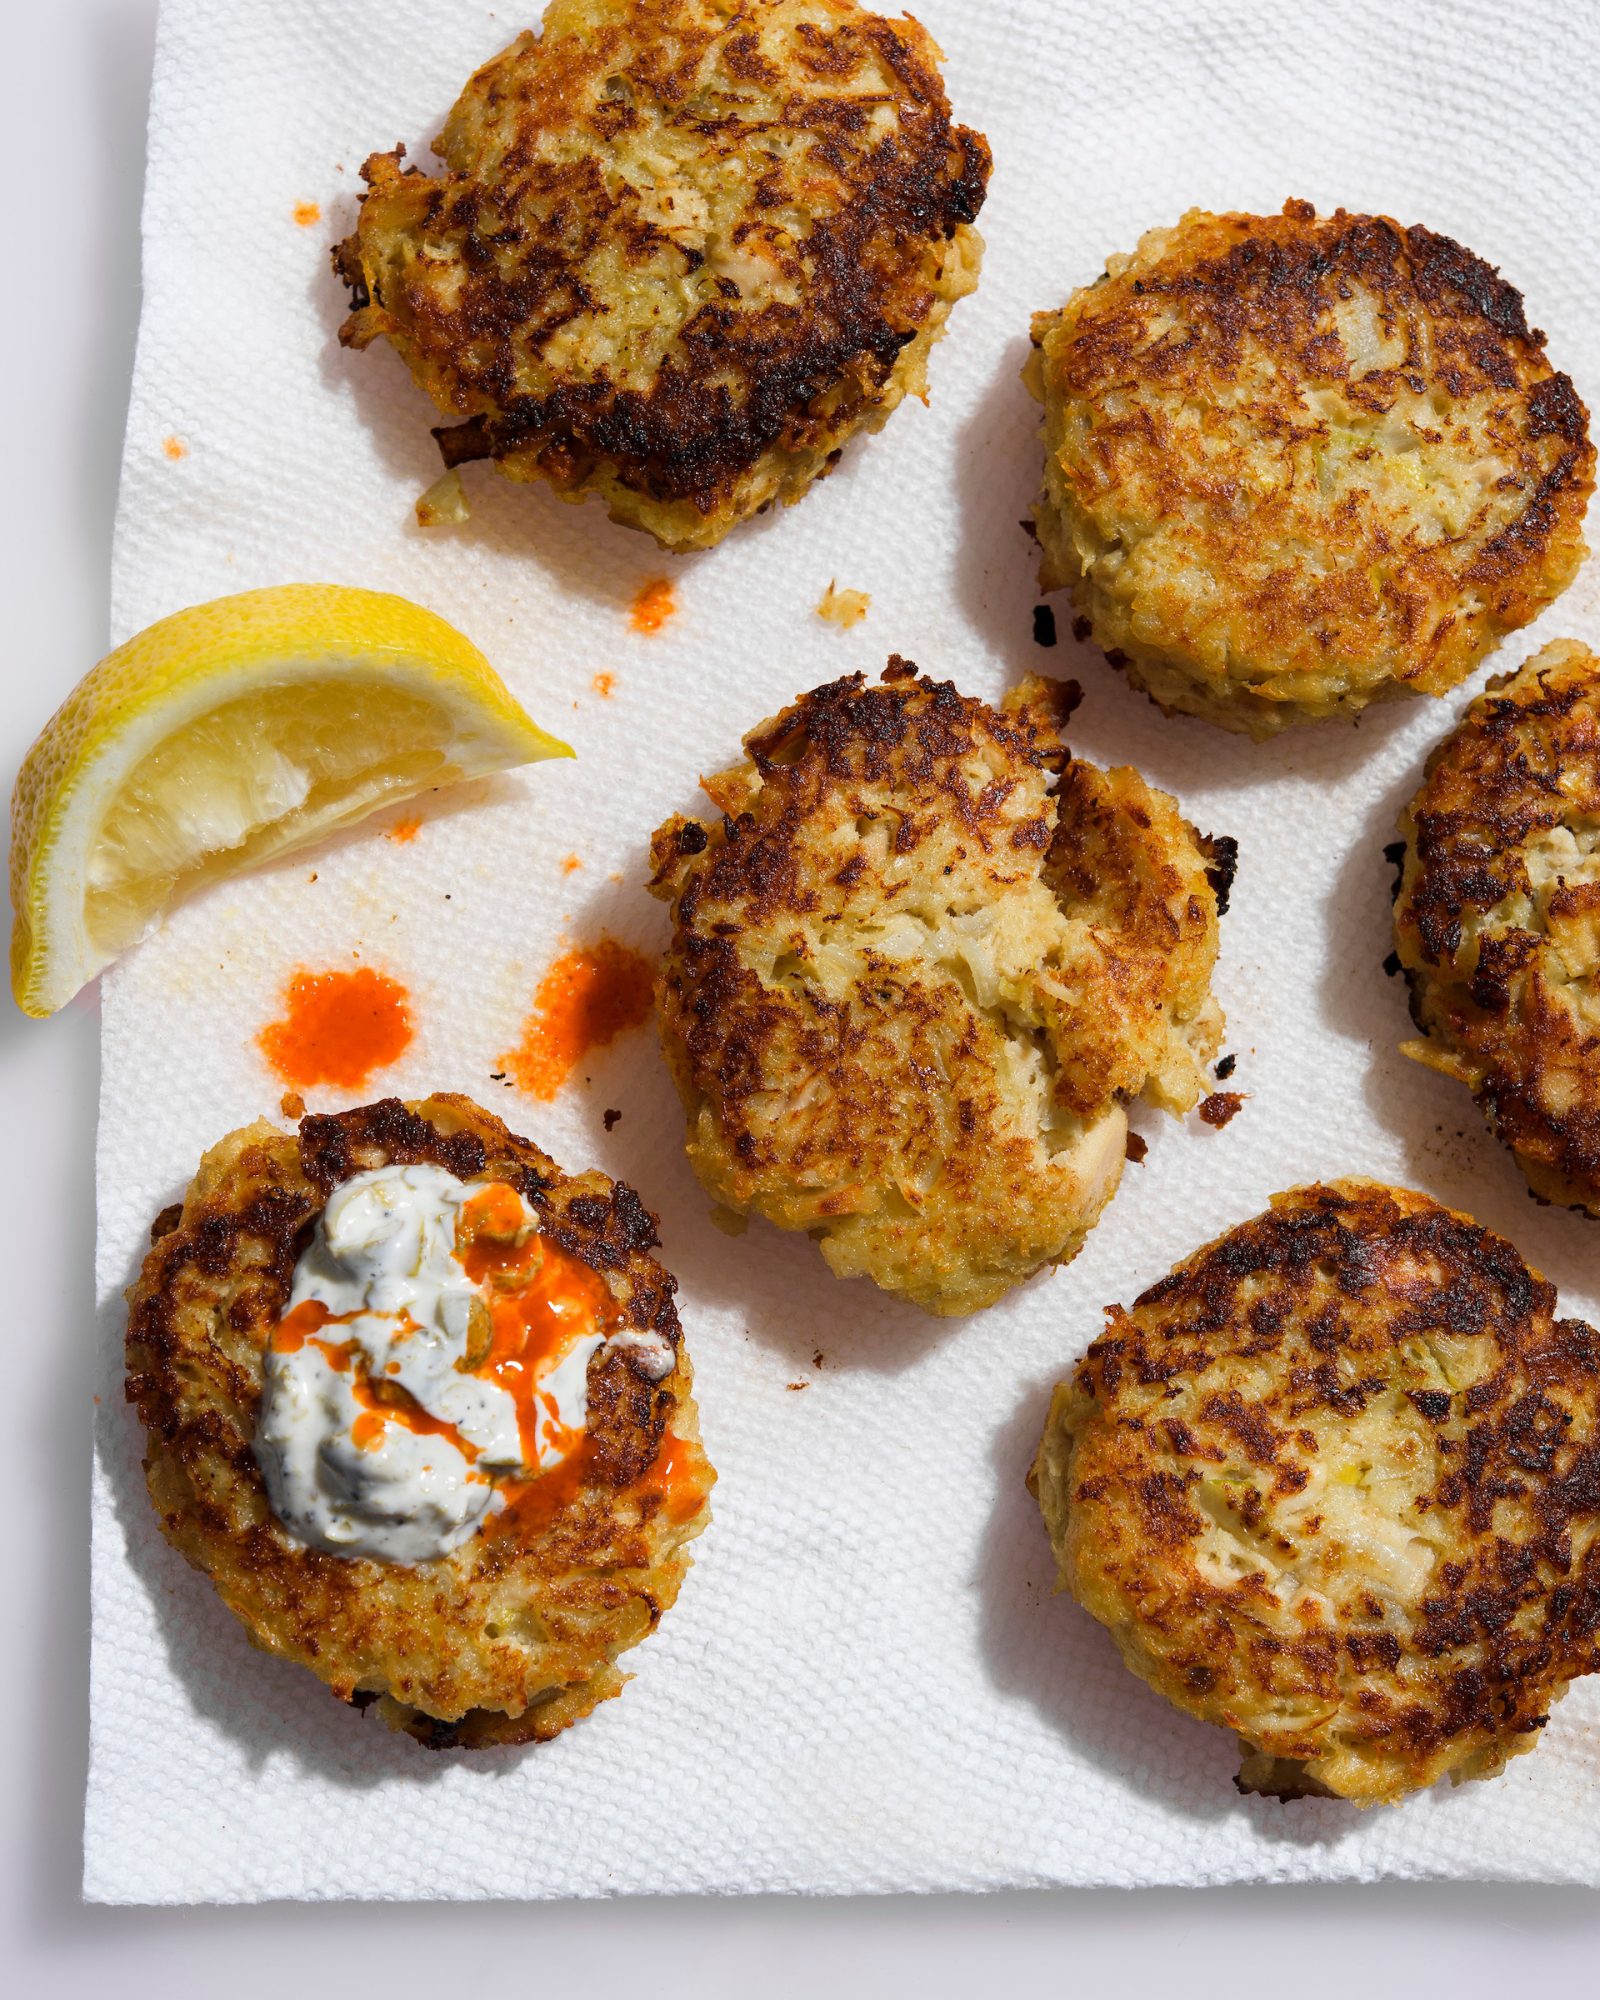 Pan Fried Tuna Cakes with Yogurt Caper Sauce Cook What You Have Milk Street